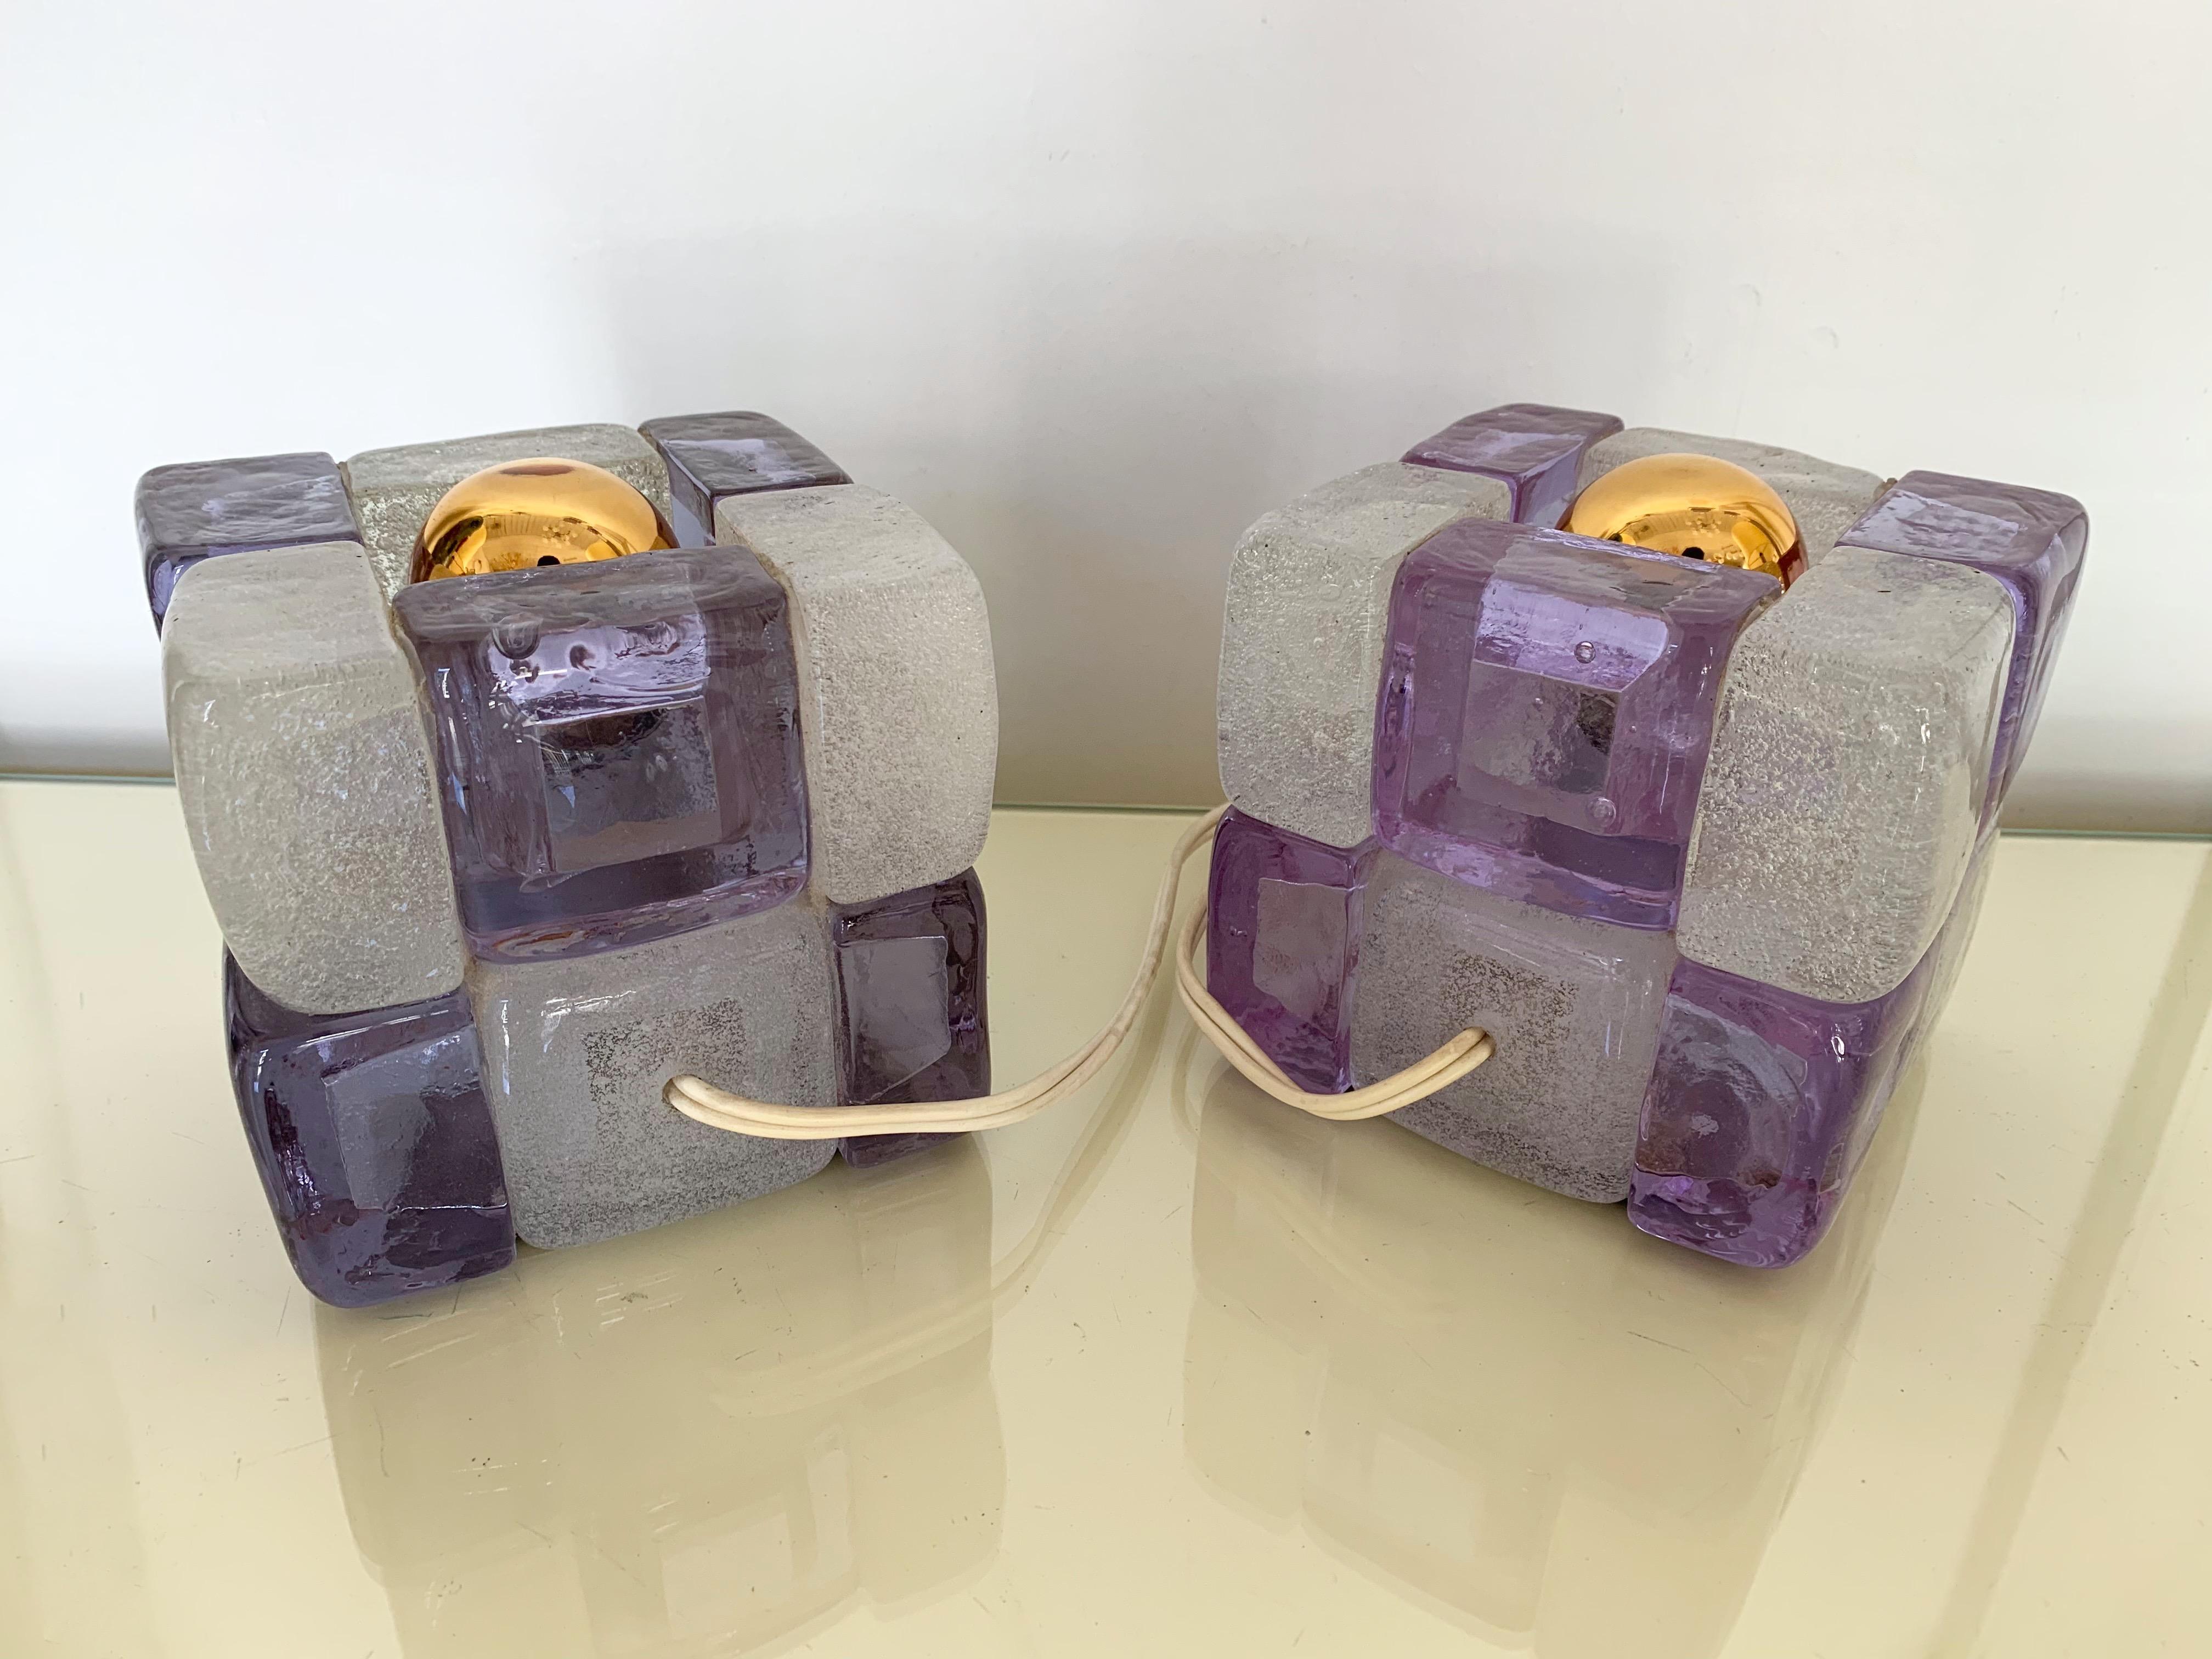 Nice pair of bedside or table lamps pressed glass cube by the manufacture Poliarte in light purple lila and clear bubble white. Work with all normal bulbs. Famous design like Mazzega Murano, Venini, Vistosi, Biancardi, Longobard.